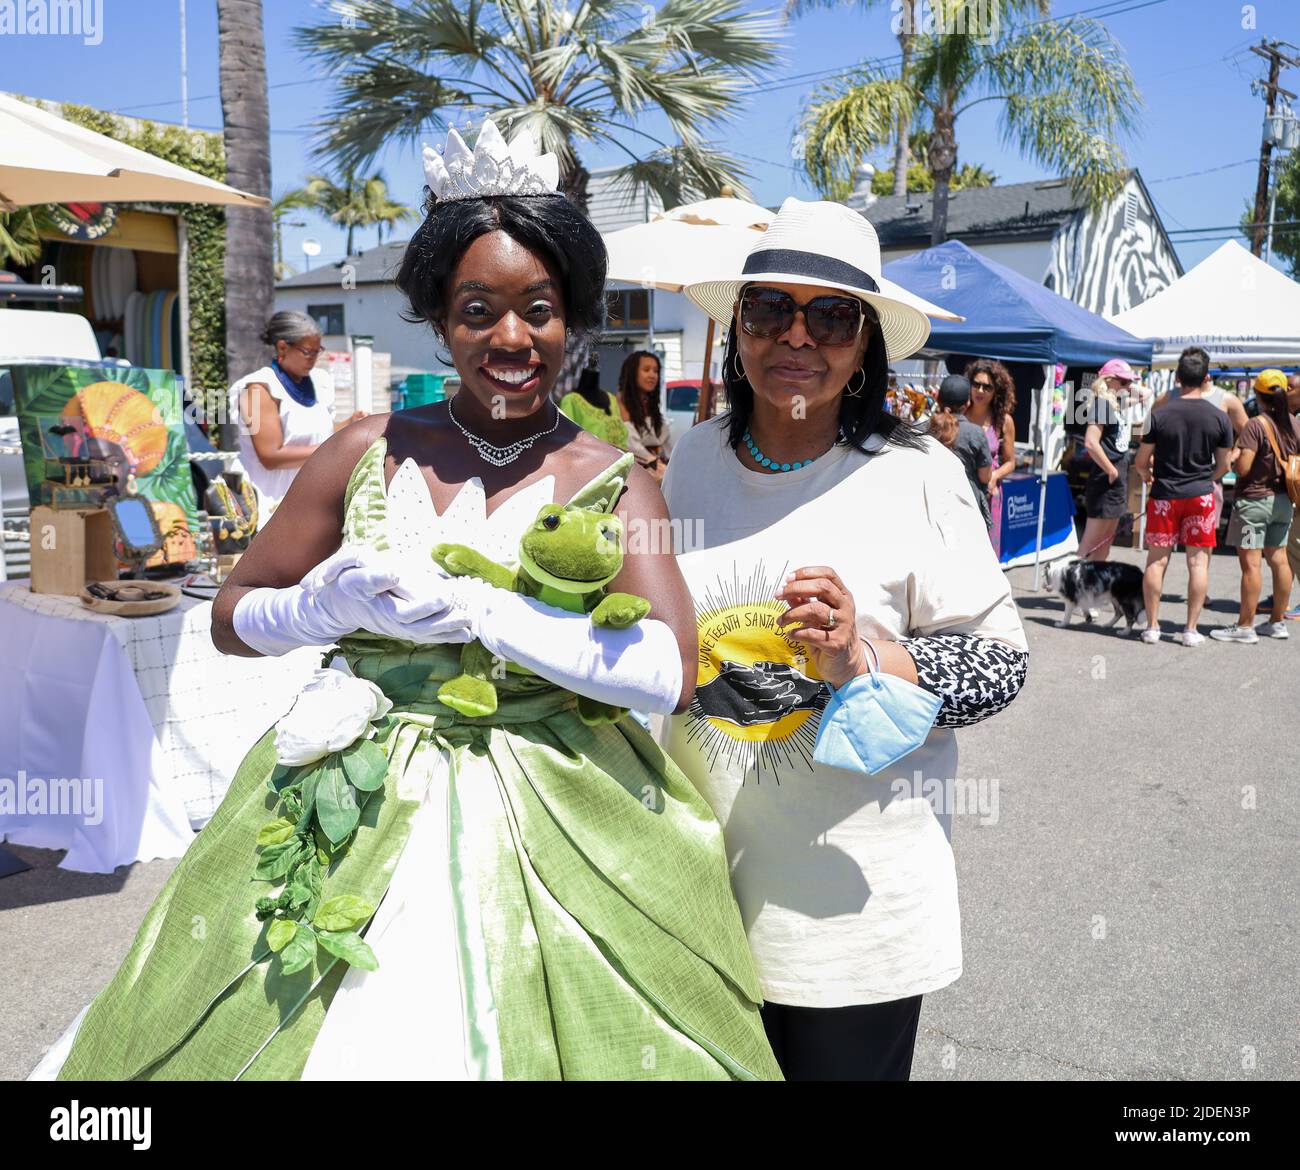 Santa Barbara, California, USA. 19th June, 2022. Juneteenth Santa Barbara celebration, at the 200 E. Grey Ave. block, on June 19, 2022. Pictured here as Princess Tiana from Princess and the Frog is Bria Bennett, aka The Chocolate Princess, next to Dianne Travis Teague, Director of Pacifica Graduate Institute's Alumni Relations, one of several sponsors of this year's Juneteenth event. Now an official national holiday in the USA, hundreds were in attendance celebrating the anniversary of the end of slavery, and promoting African American led businesses and non-profit serving the black communit Stock Photo